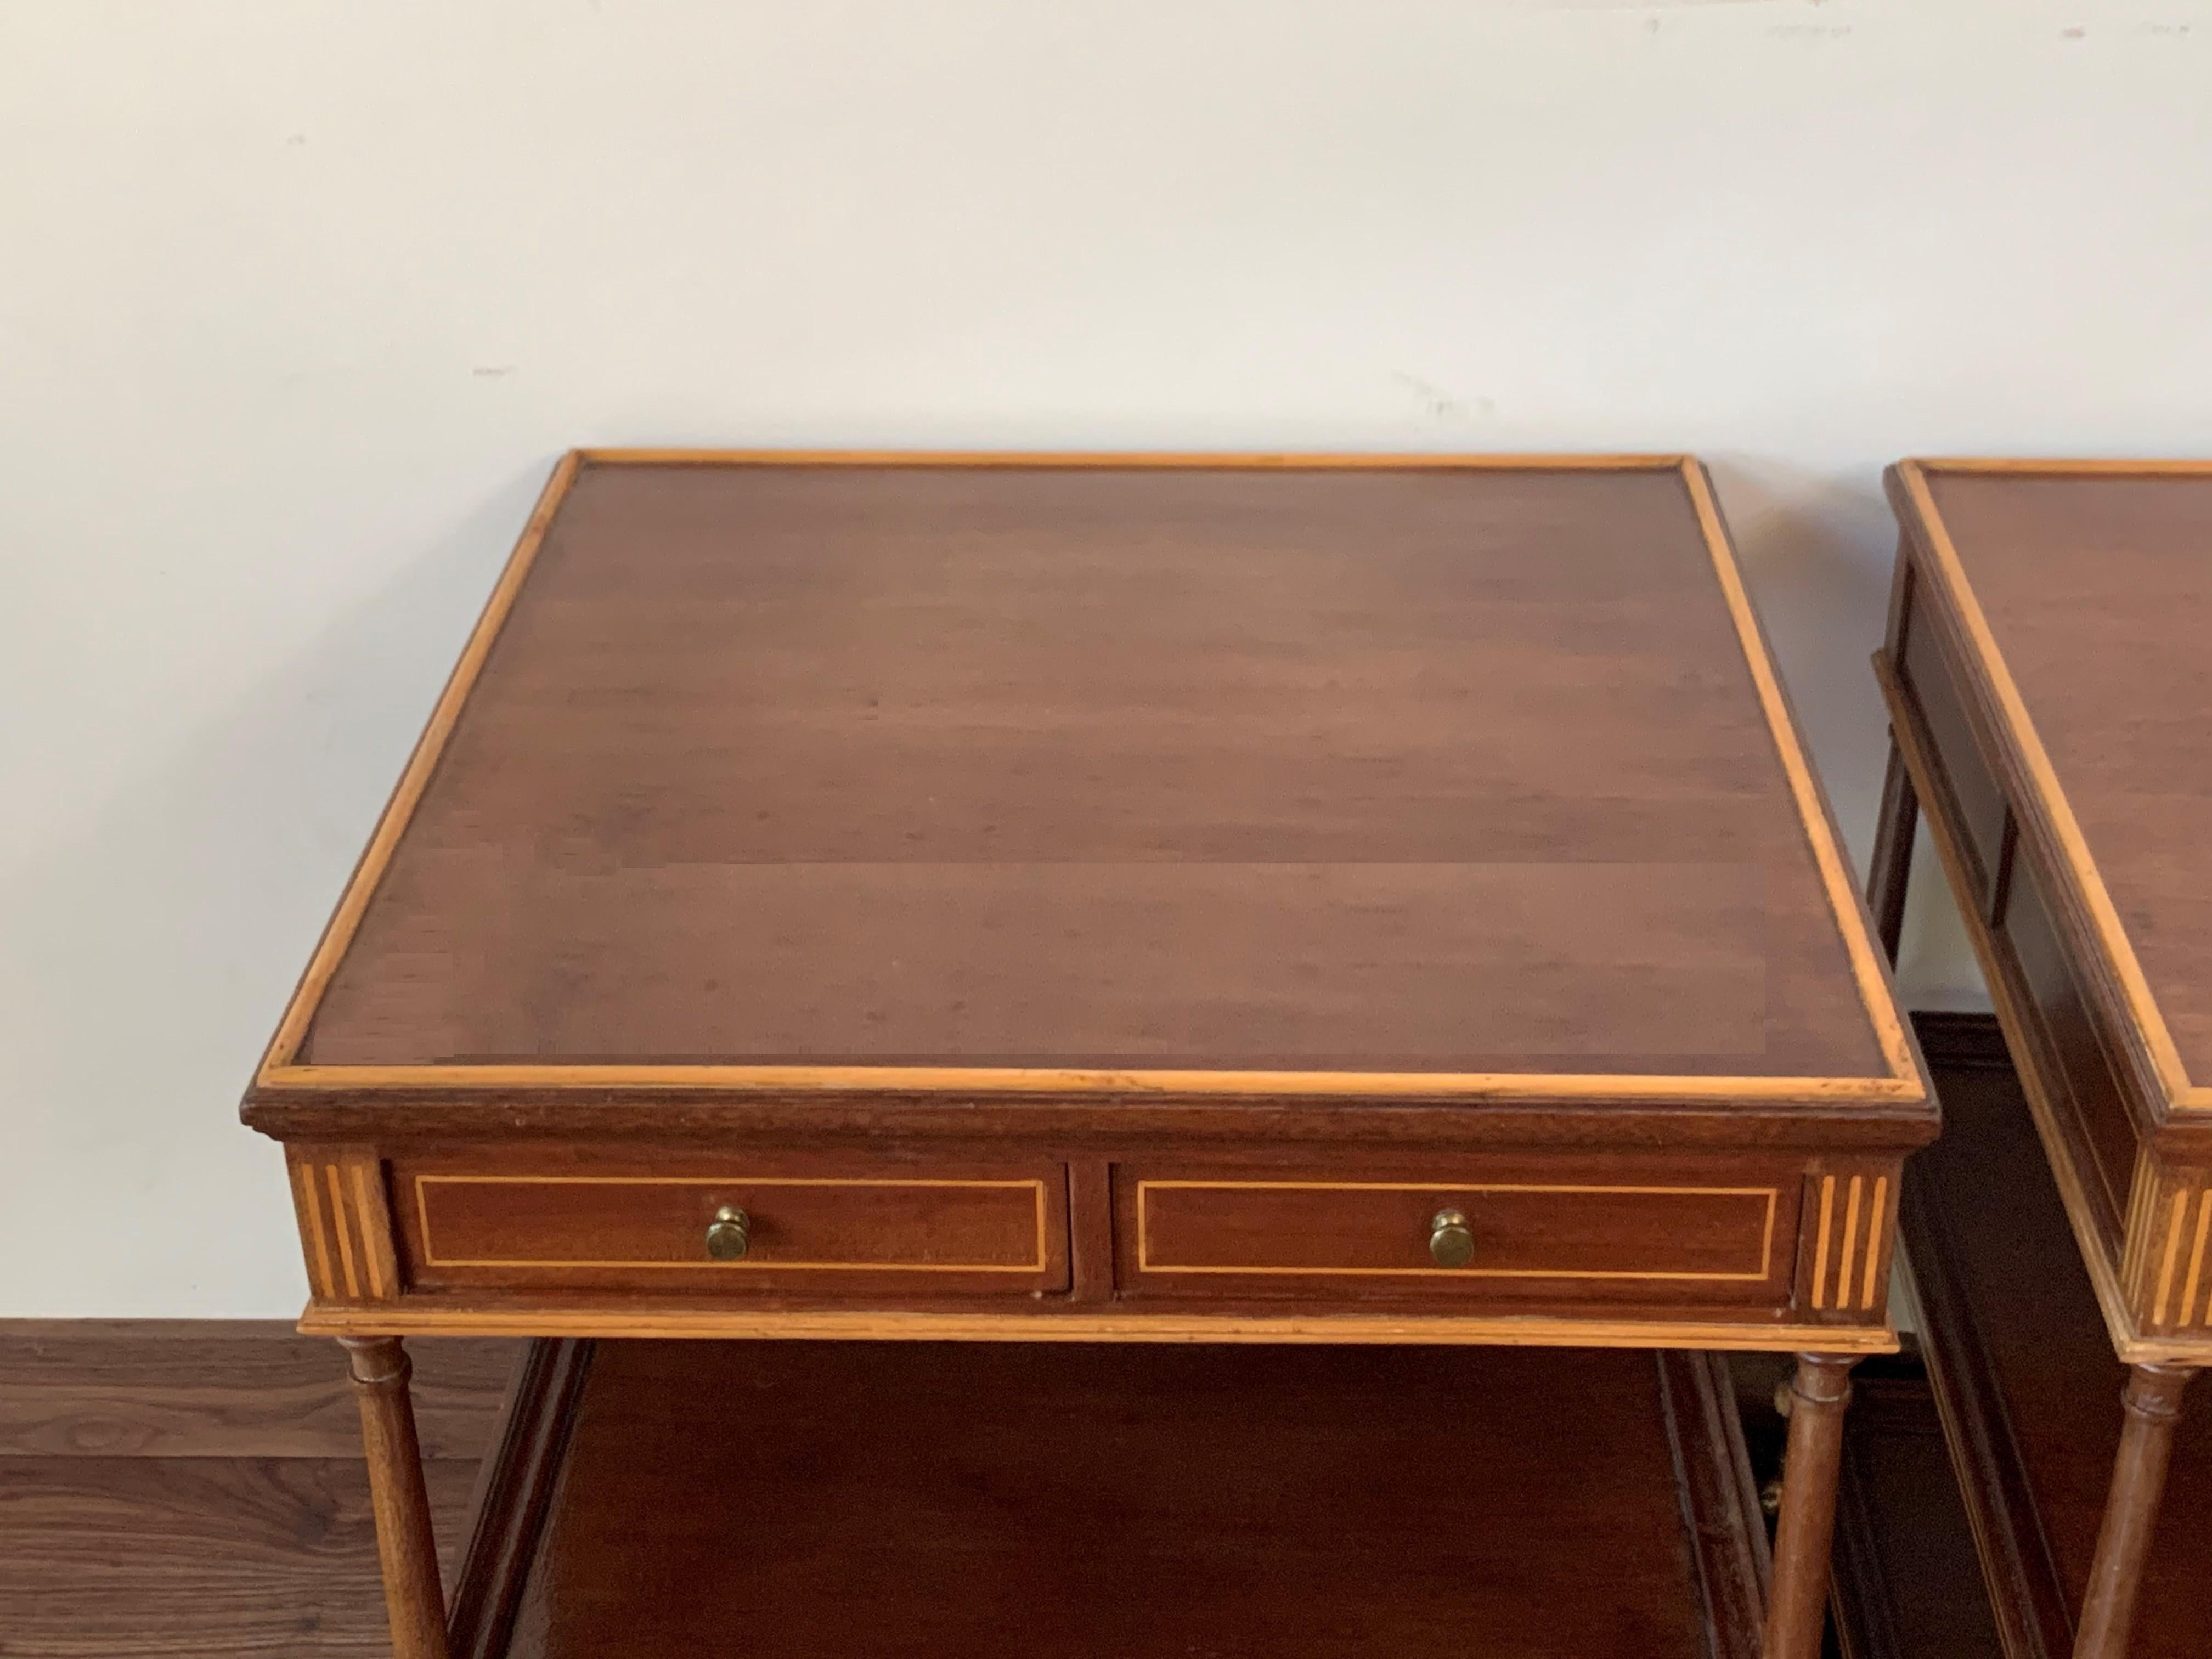 20th Century 20th Pair of Side or Nightstands Tables on Wheels with Two Drawers & Two Shelves